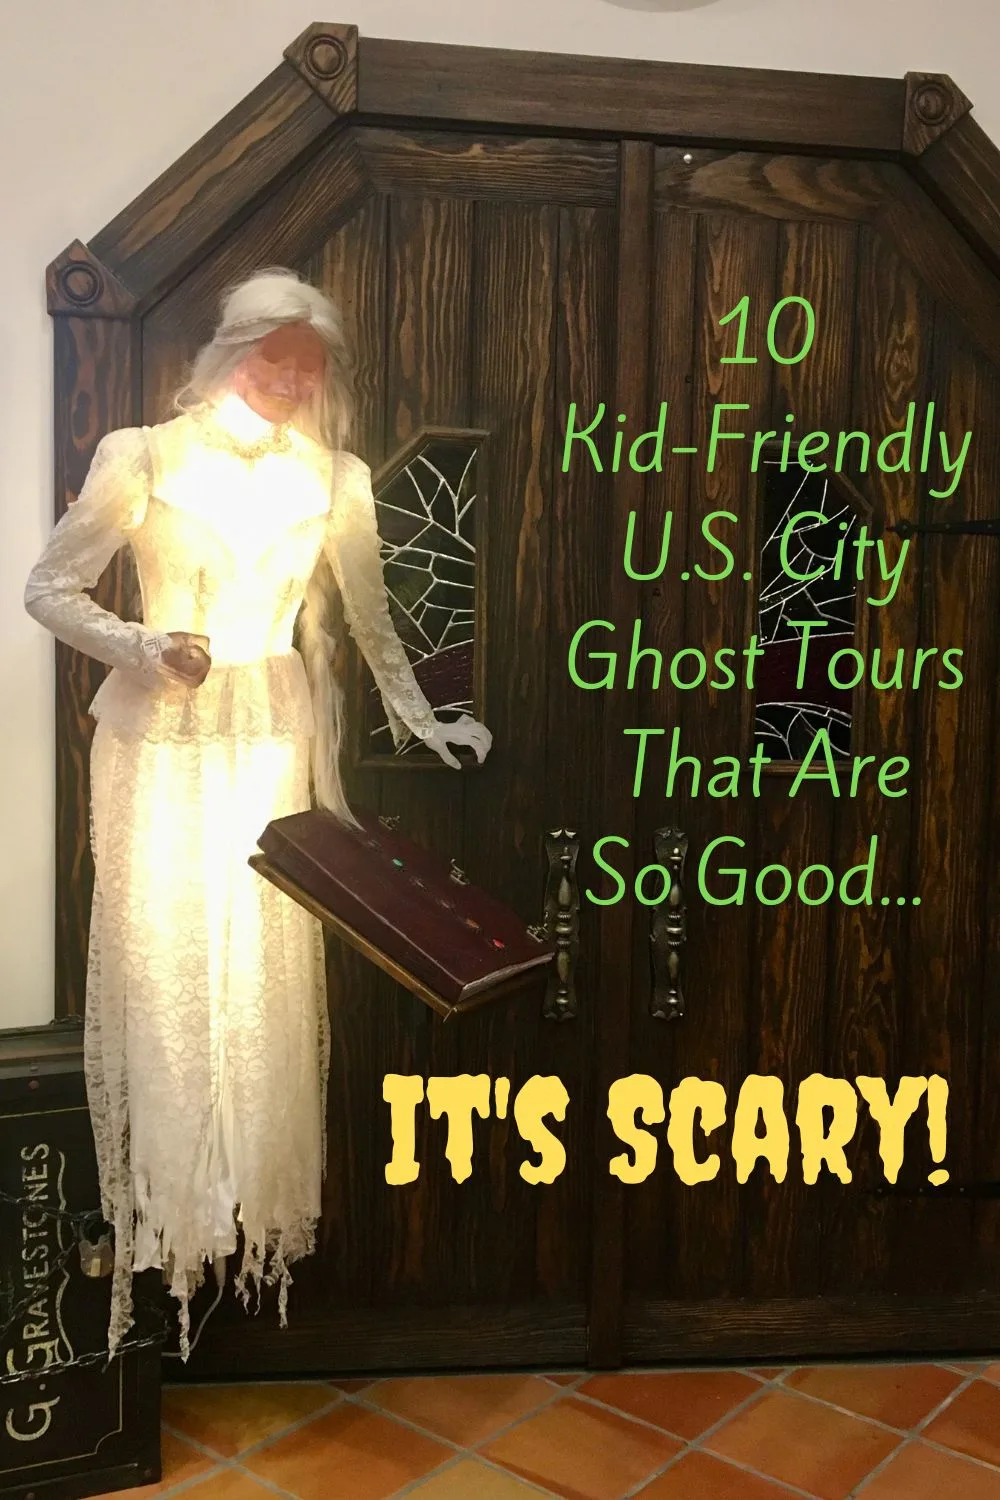 10 outstanding kid-friendly ghost tours in popular and historic u.s. cities including boston, savannah, new orleans, louisville, st. augustine, philadelphia, nyc.